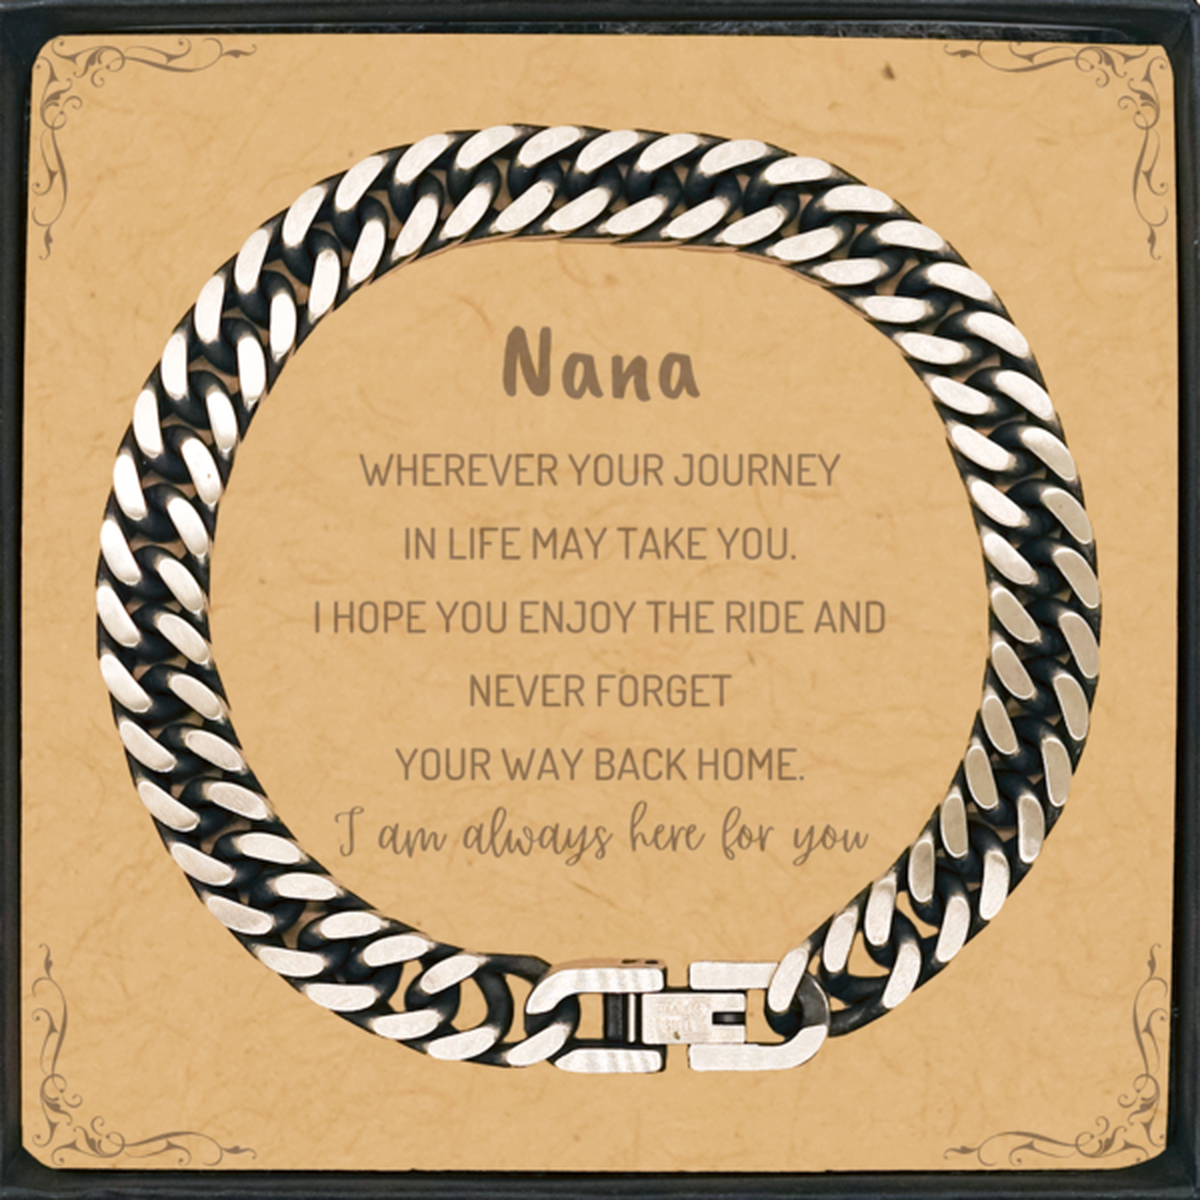 Nana wherever your journey in life may take you, I am always here for you Nana Cuban Link Chain Bracelet, Awesome Christmas Gifts For Nana Message Card, Nana Birthday Gifts for Men Women Family Loved One